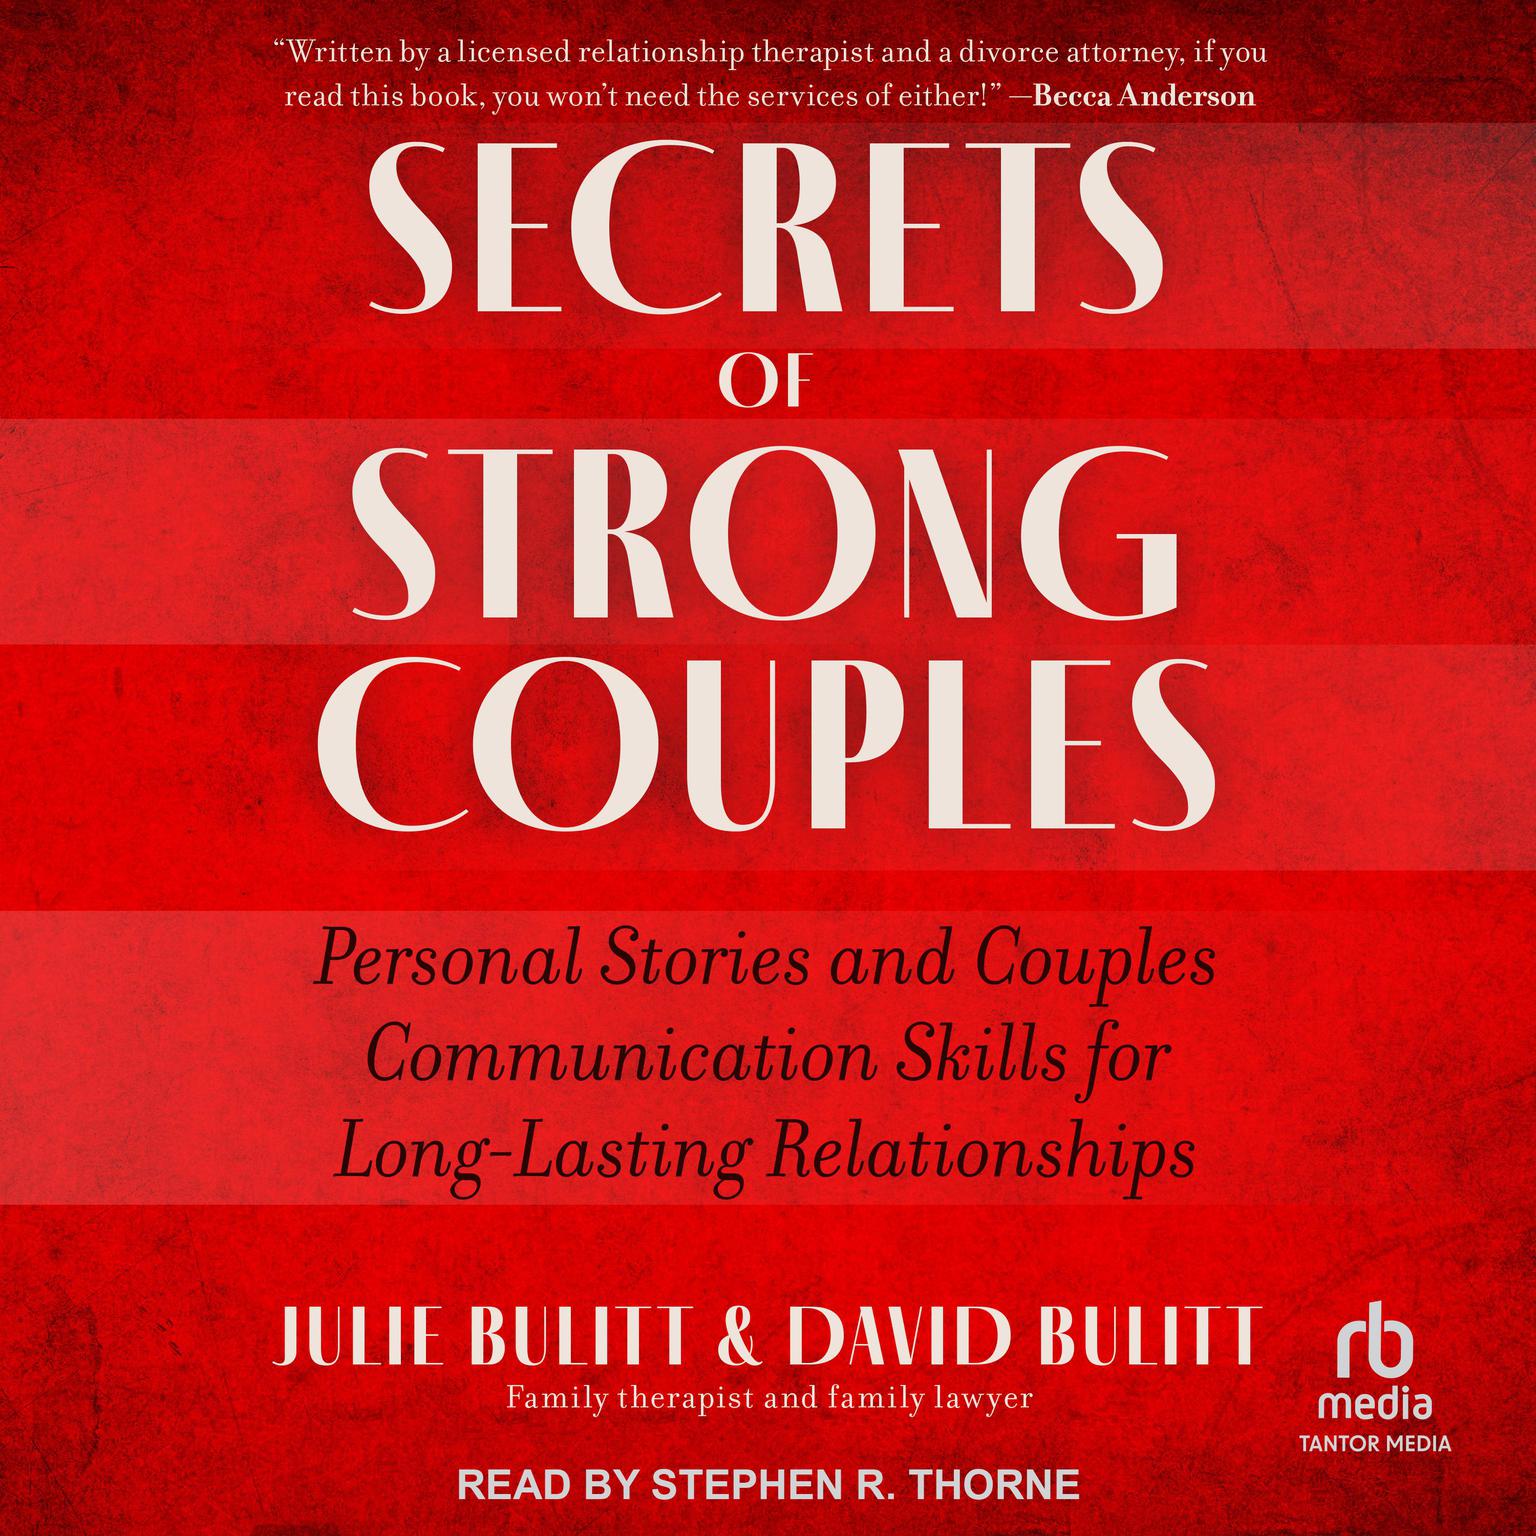 Secrets of Strong Couples: Personal Stories and Couples Communication Skills for Long-Lasting Relationships Audiobook, by David Bulitt